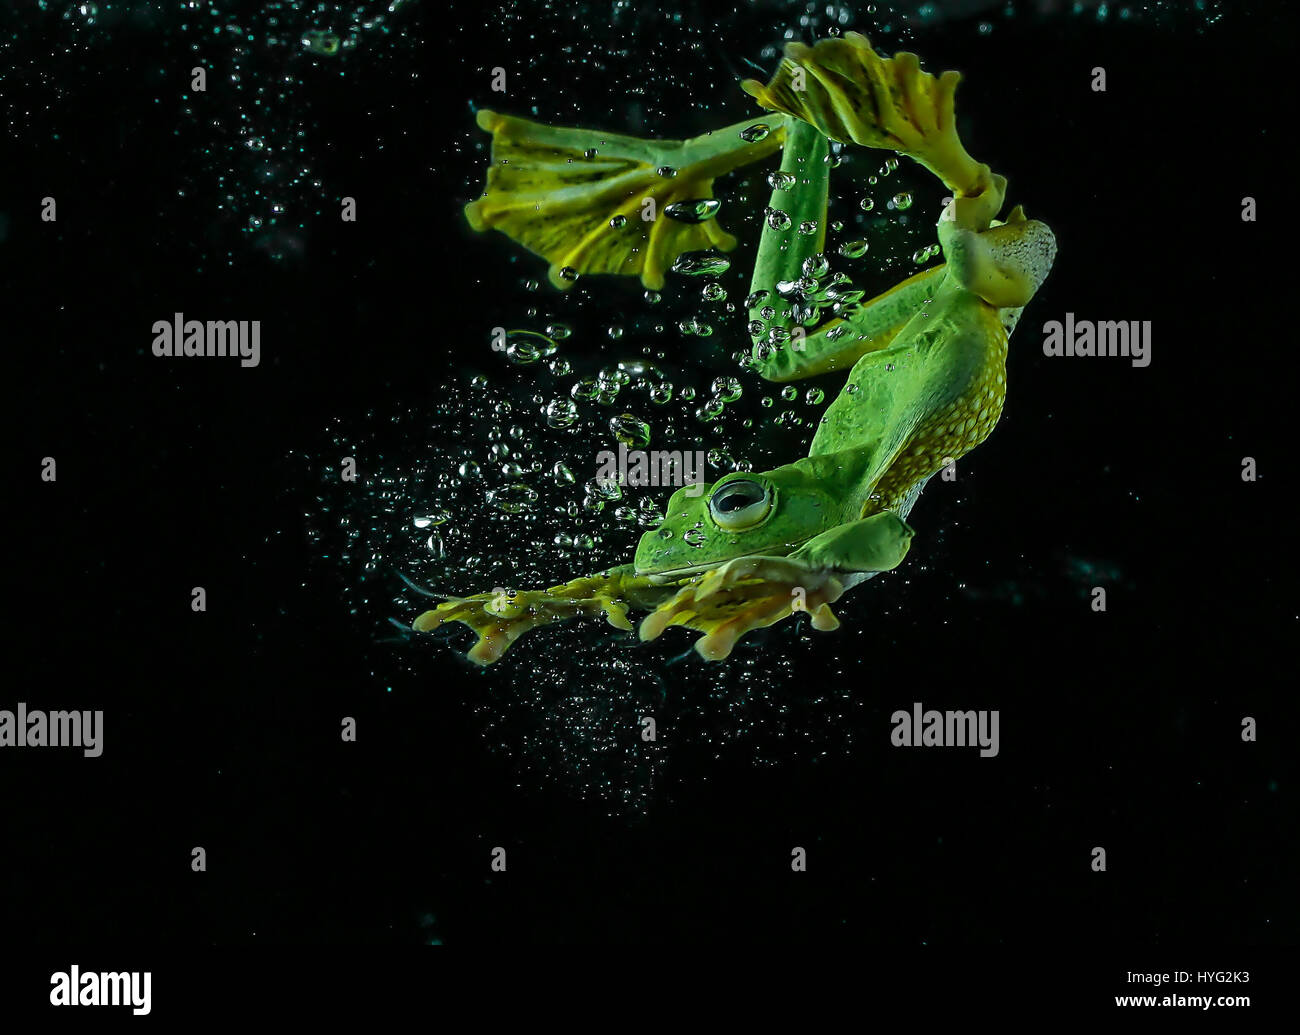 JAKARTA, INDONESIA: SPECTACULAR pictures of a frog diving and swimming underwater show just how graceful these otherwise ungainly creatures can be. The amphibious creature can be seen plopping into the water and swimming in this series of pictures taken by a nature loving industrial manager. The images were taken by Tanto Yensen from Jakarta, who coaxed the wild Javan Gliding Tree frog into a tank of water to create the stunning shots. Stock Photo